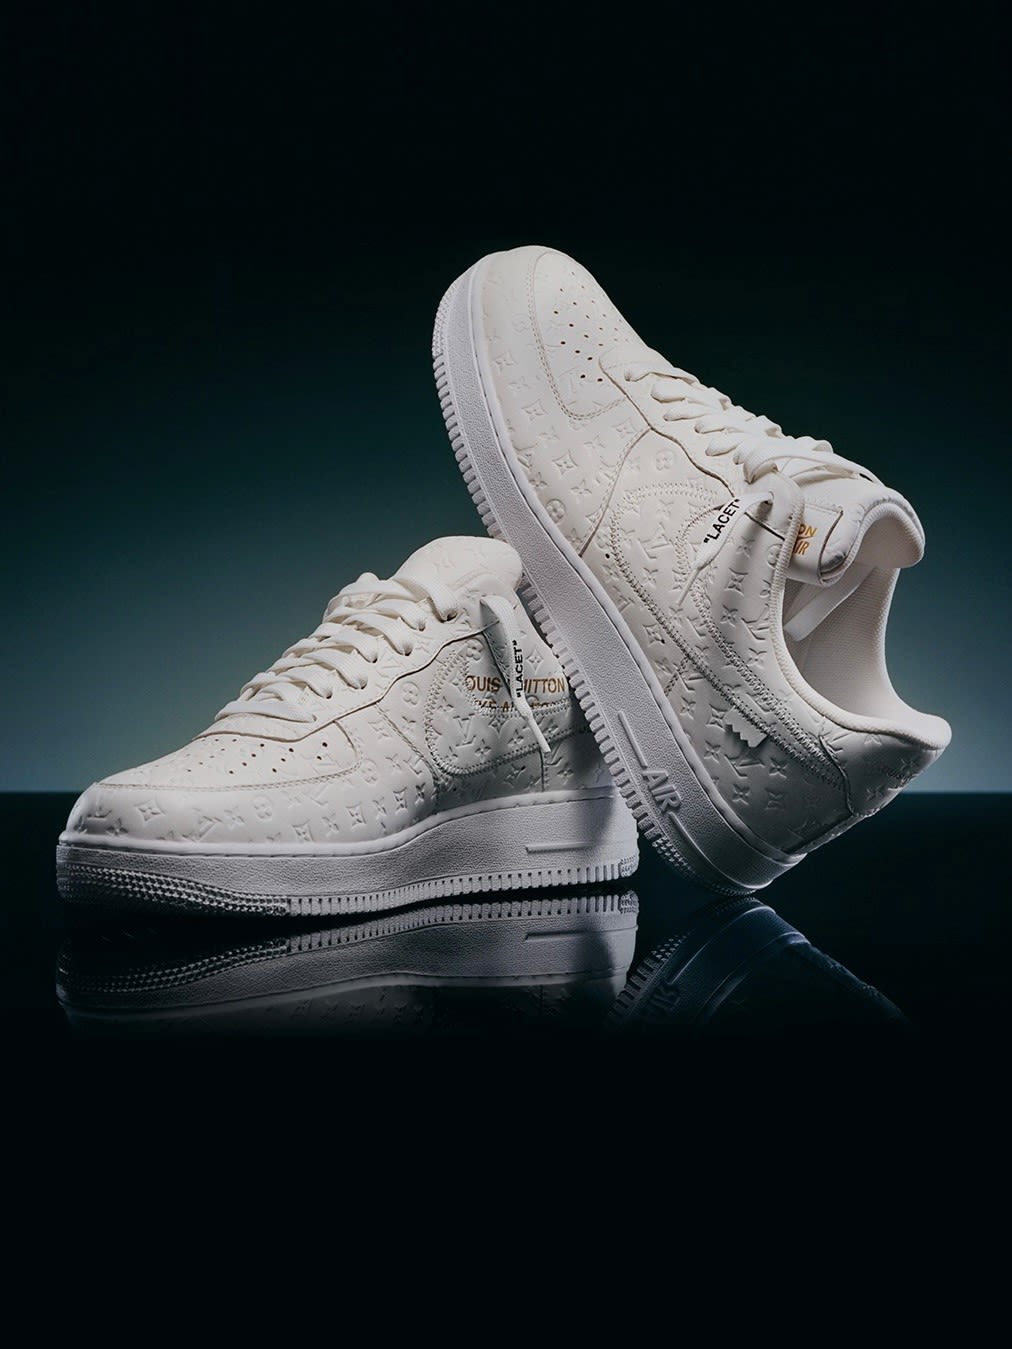 Waiting for the Louis Vuitton Nike Air Force 1 launch? Check out this  exhibition at ION Orchard - CNA Luxury